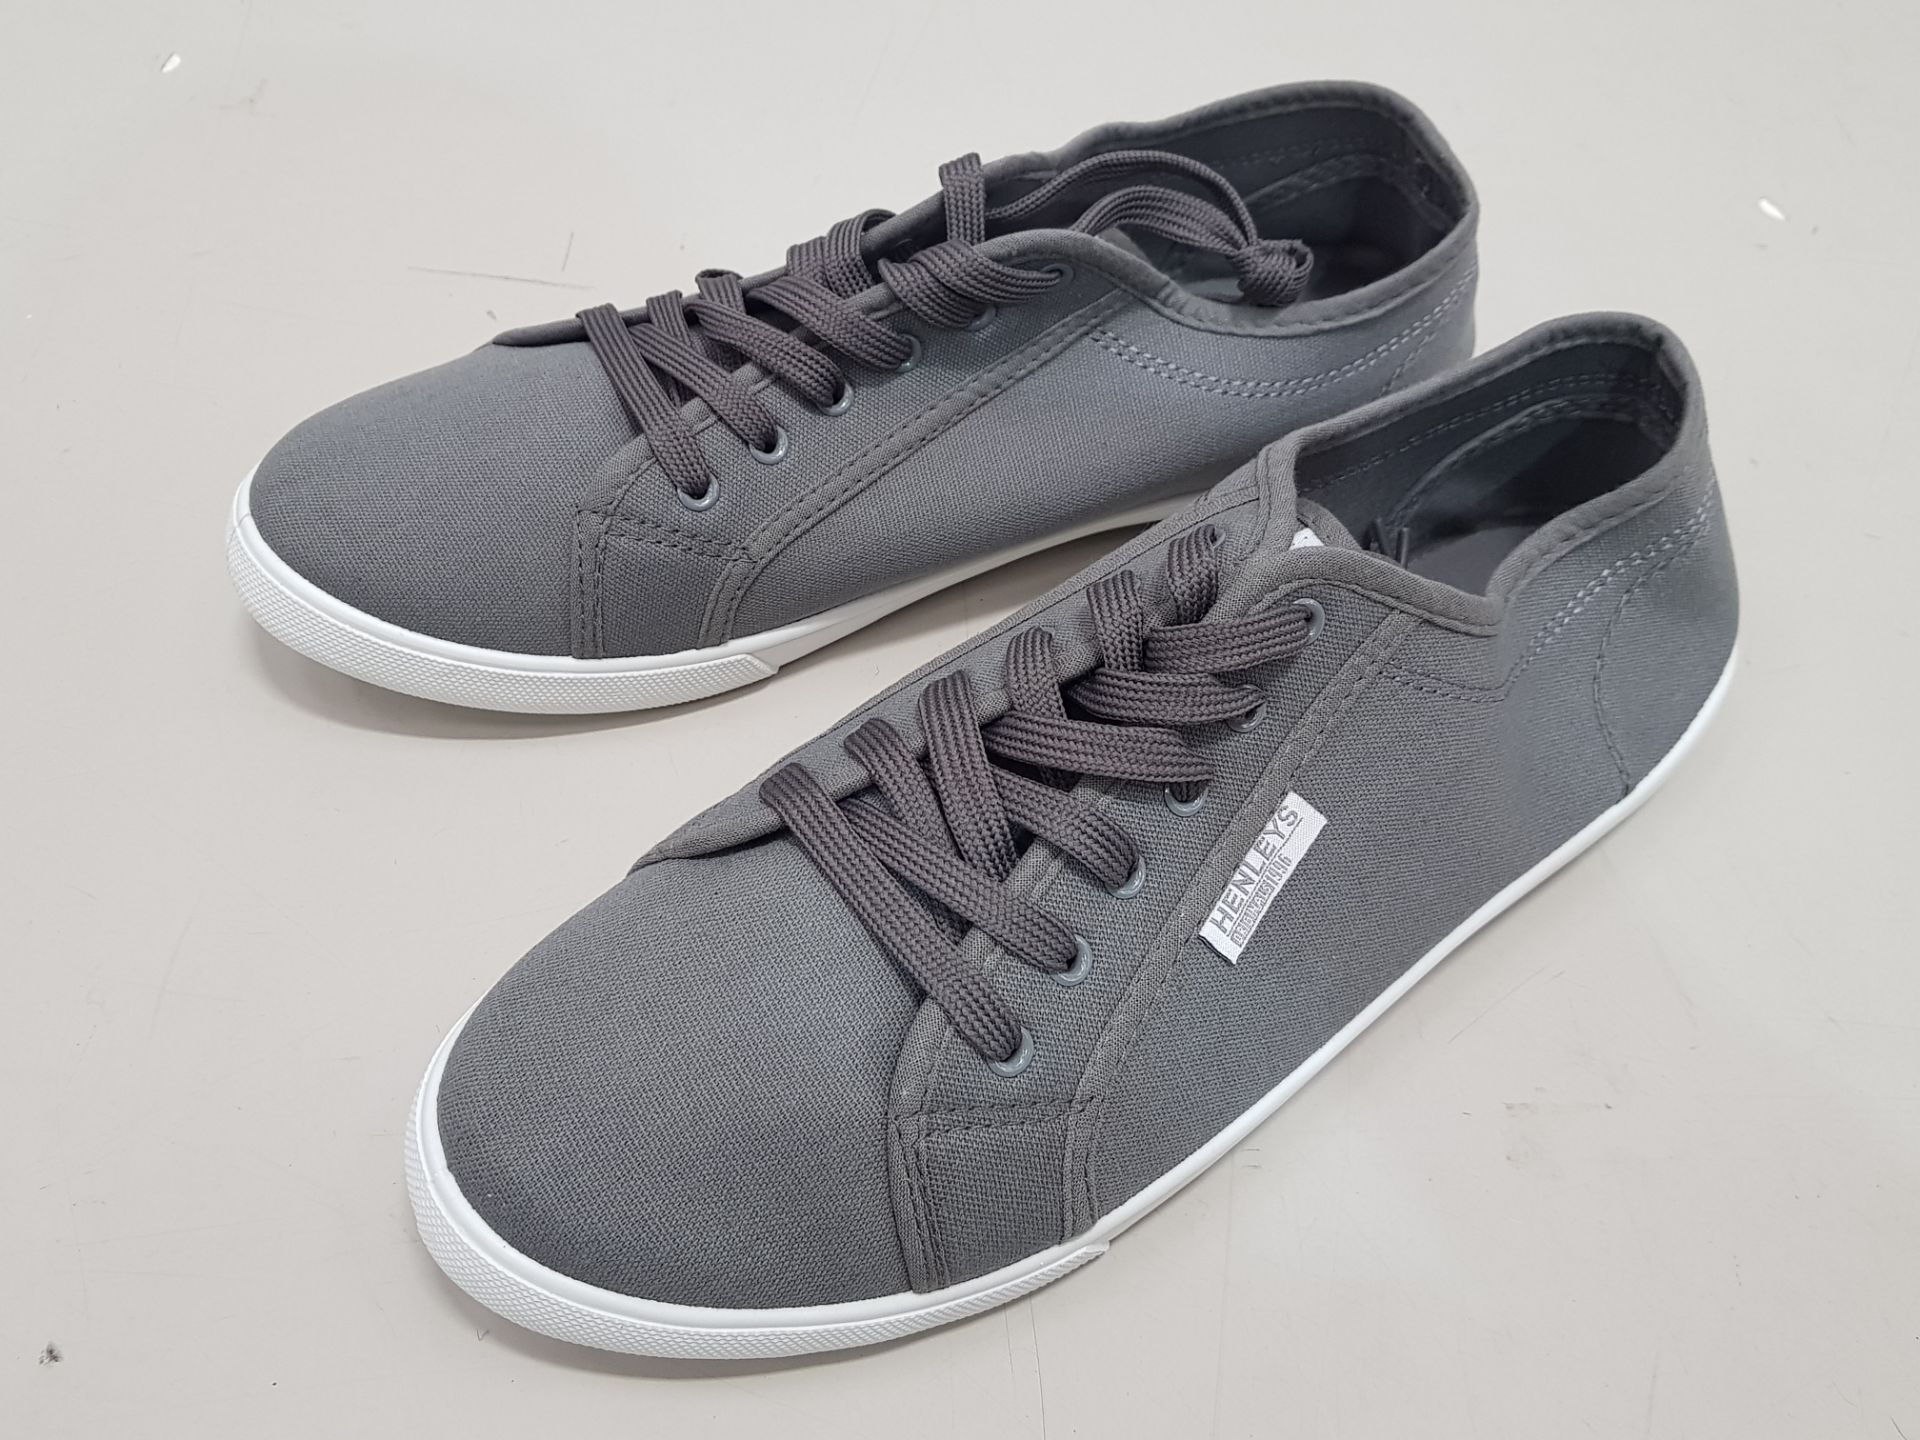 10 X BRAND NEW HENLEYS ORIGINAL CANVAS TRAINERS IN CHARCOAL GREY - ALL IN SIZE UK 10 - RRP £ 24.99 -